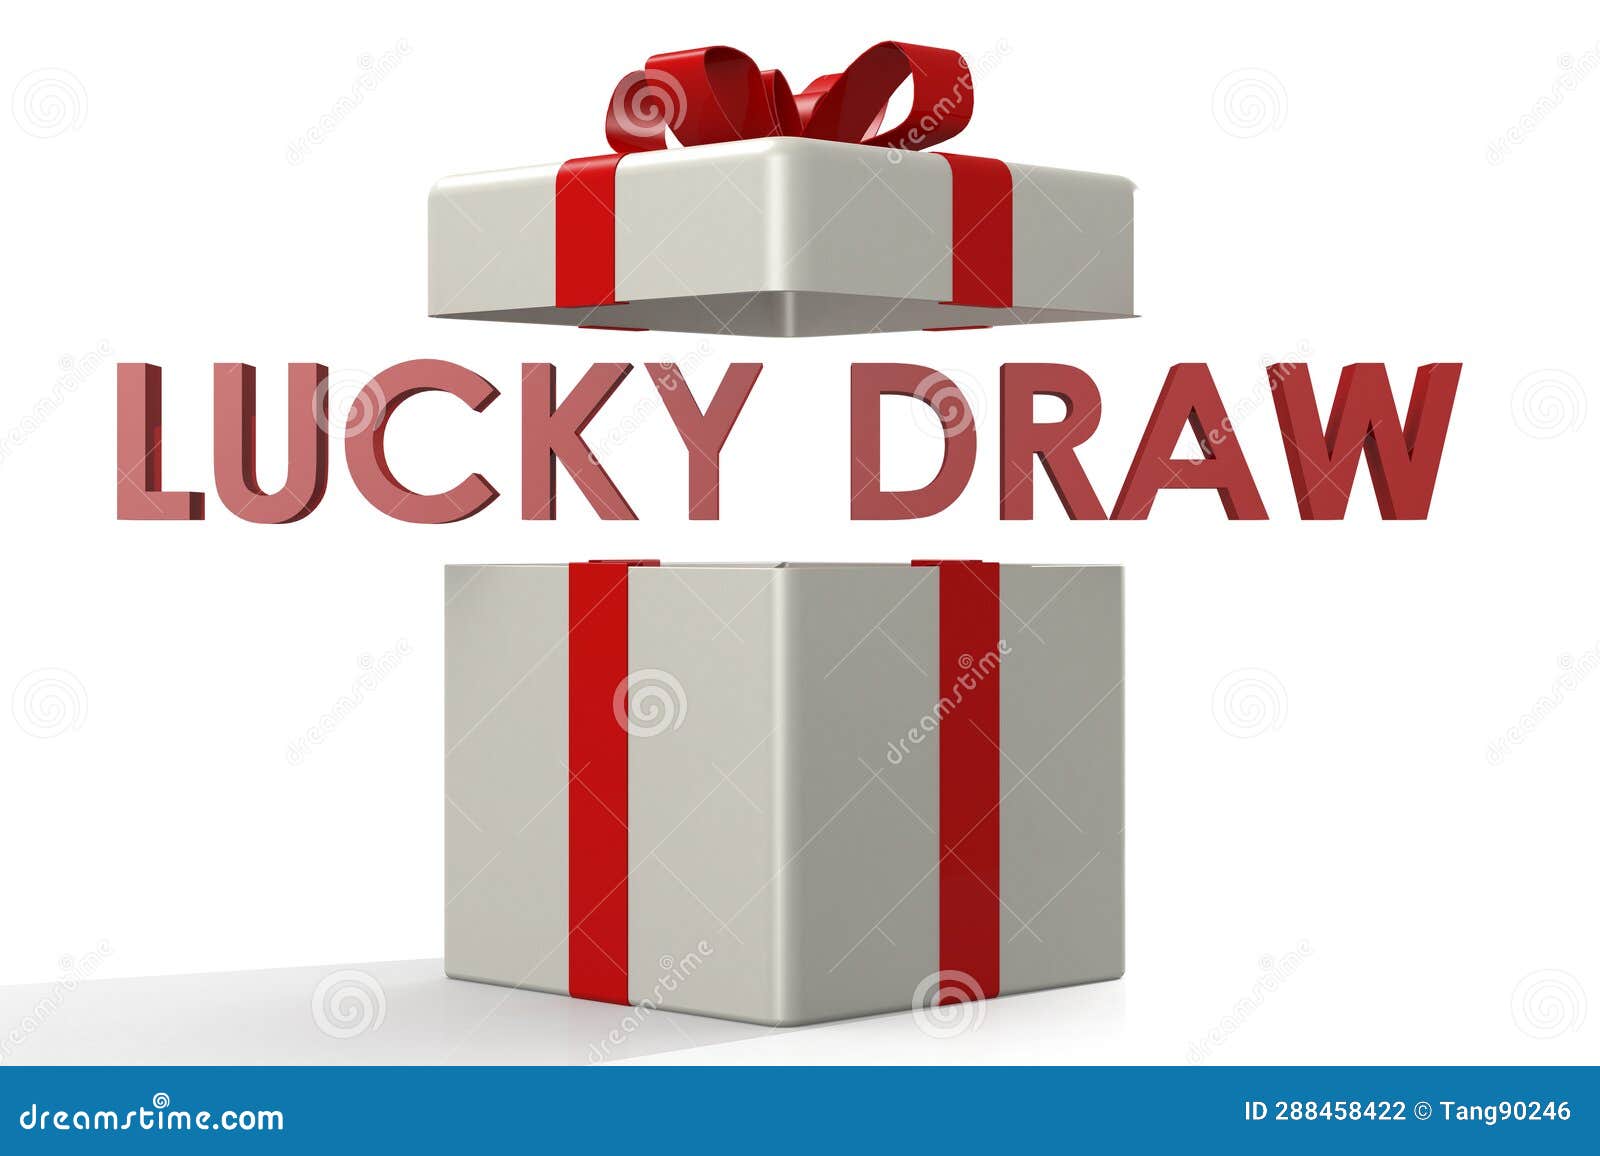 LuckyDraw+ — Host your own draw on a big screen